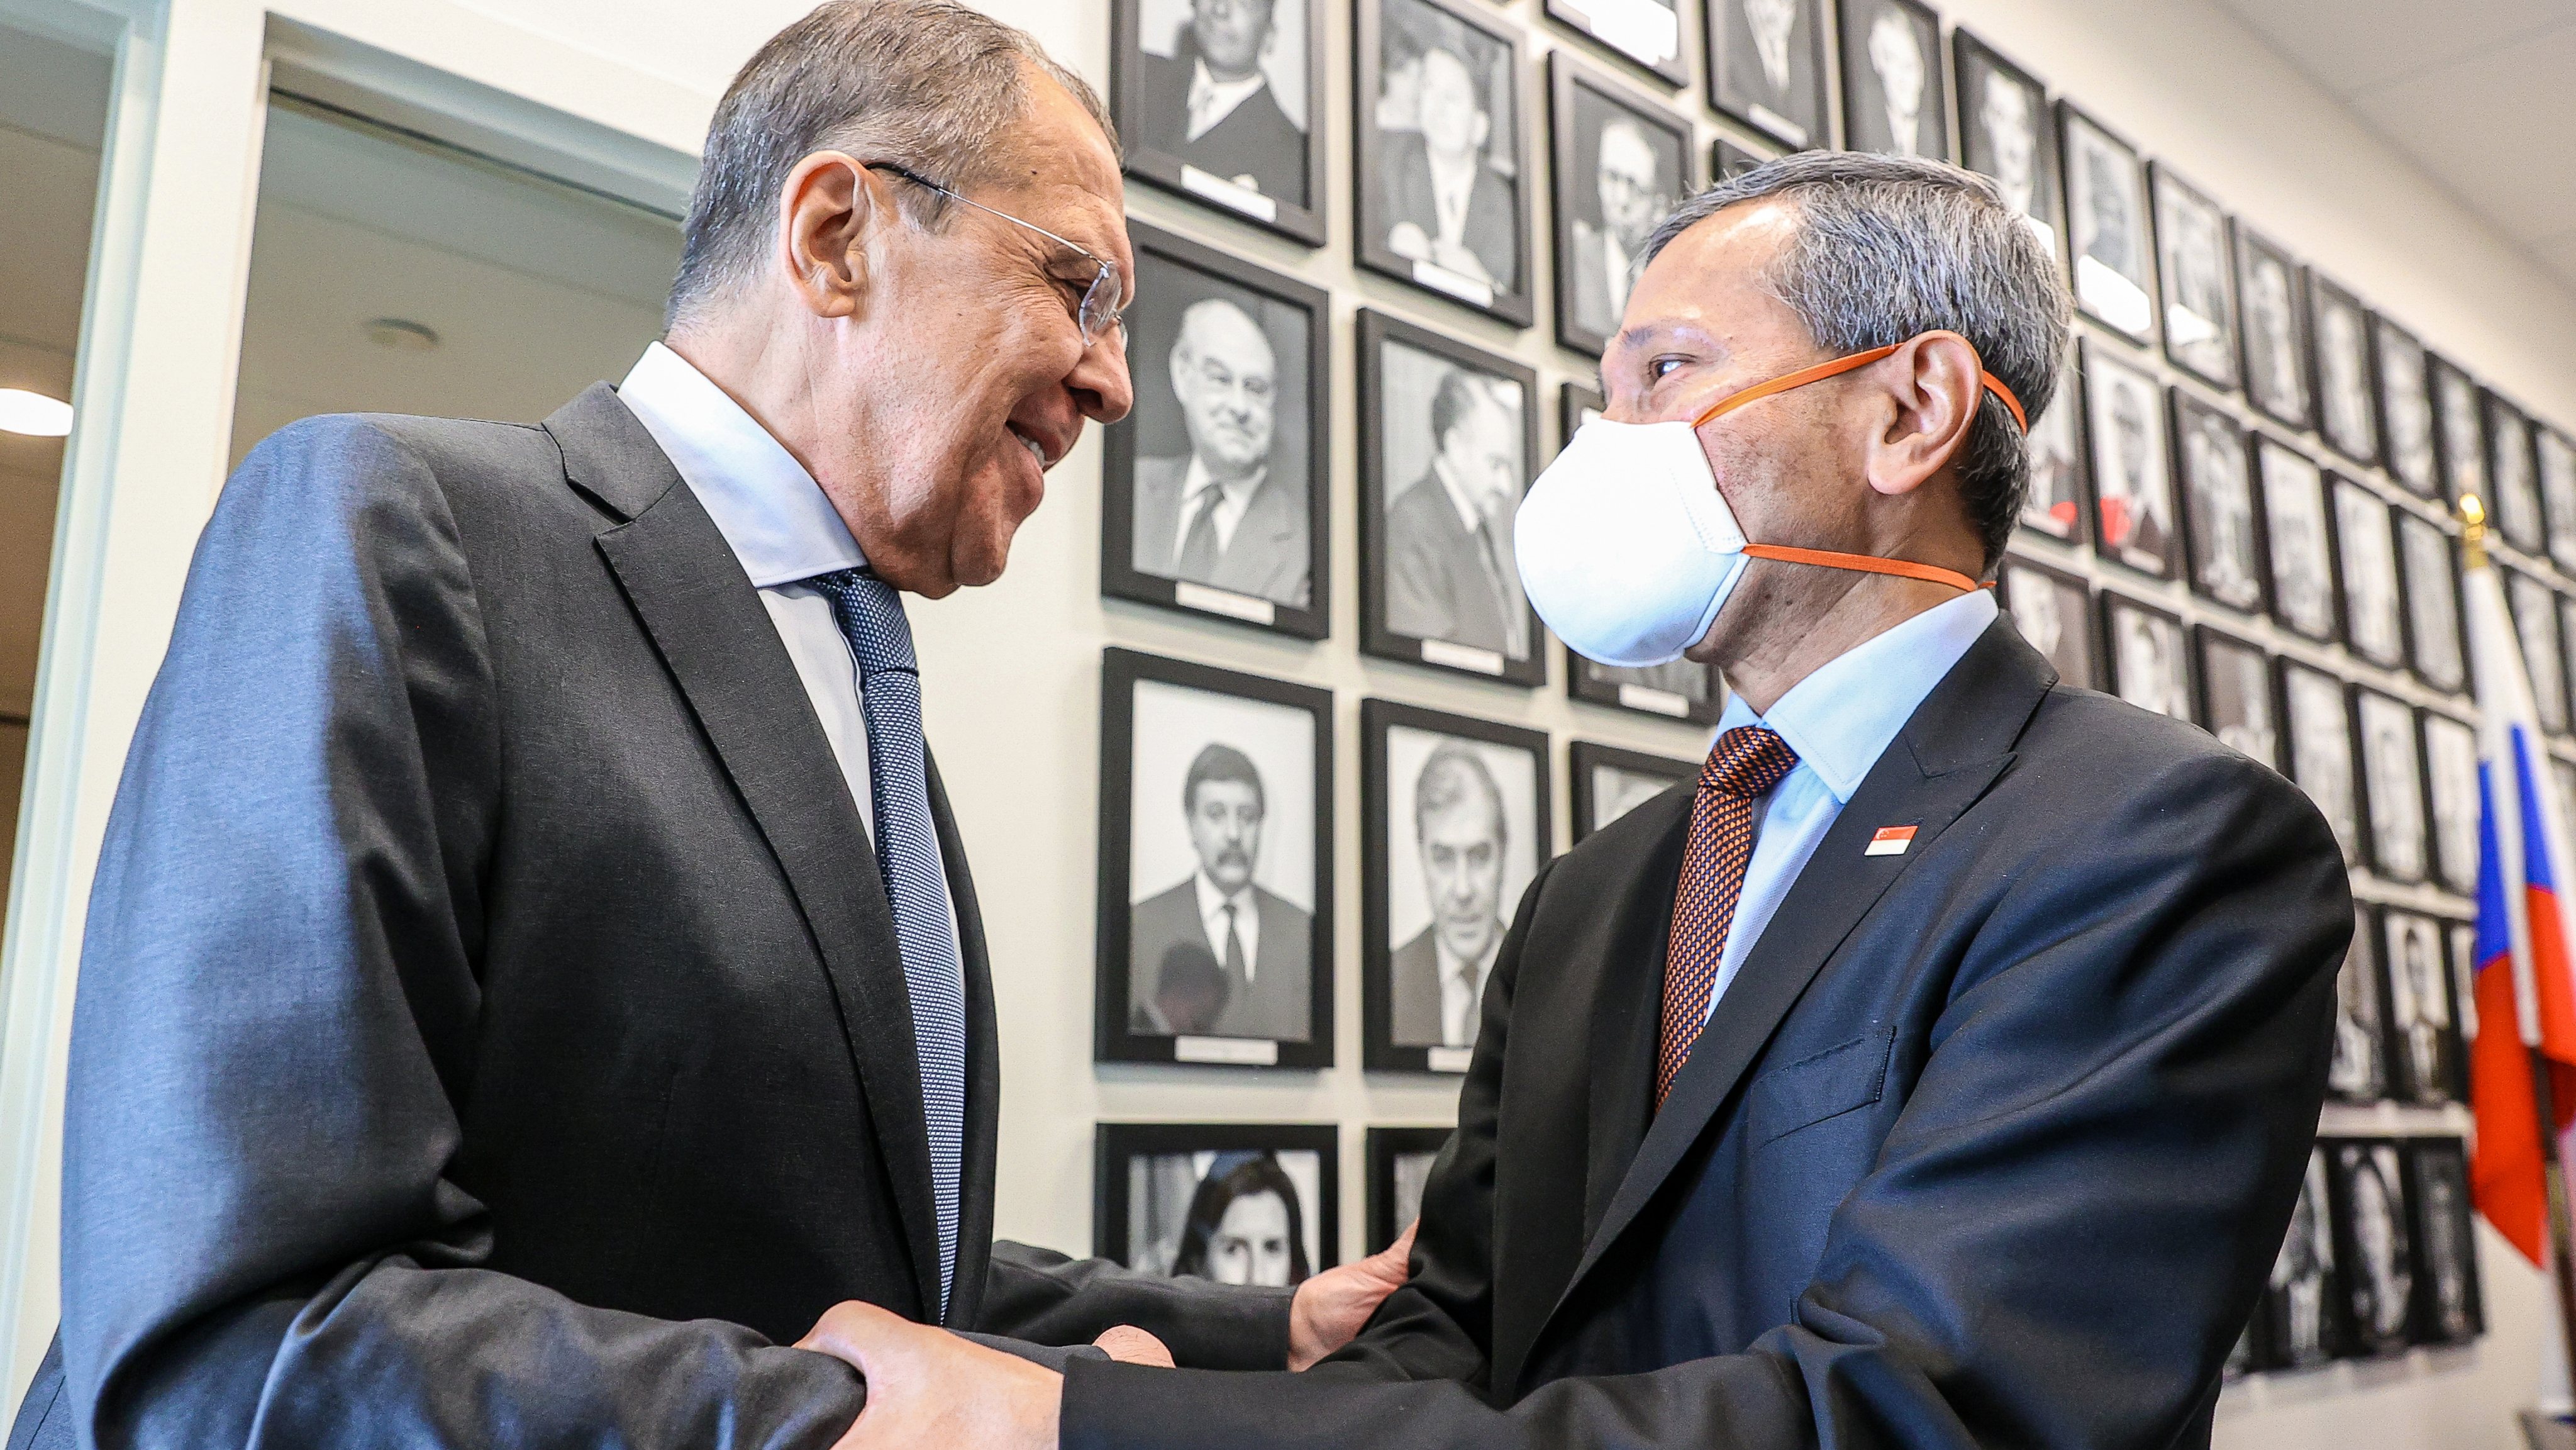 Russian Foreign Minister Lavrov visits United States